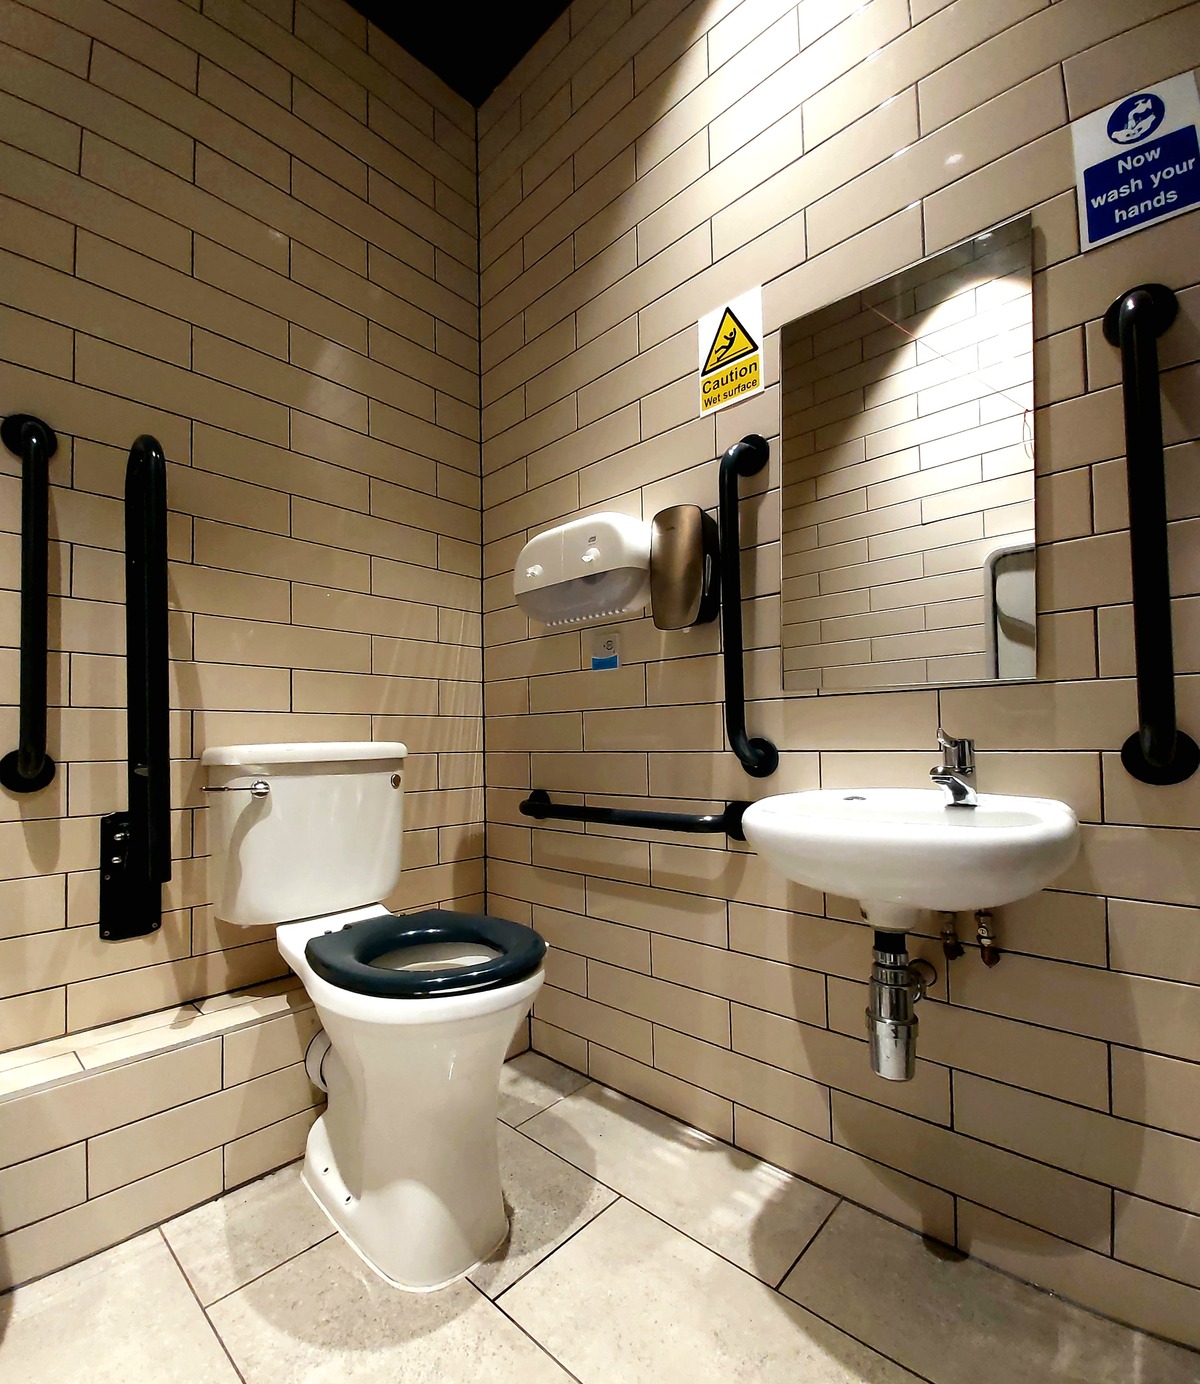 image of a doc m accessible bathroom